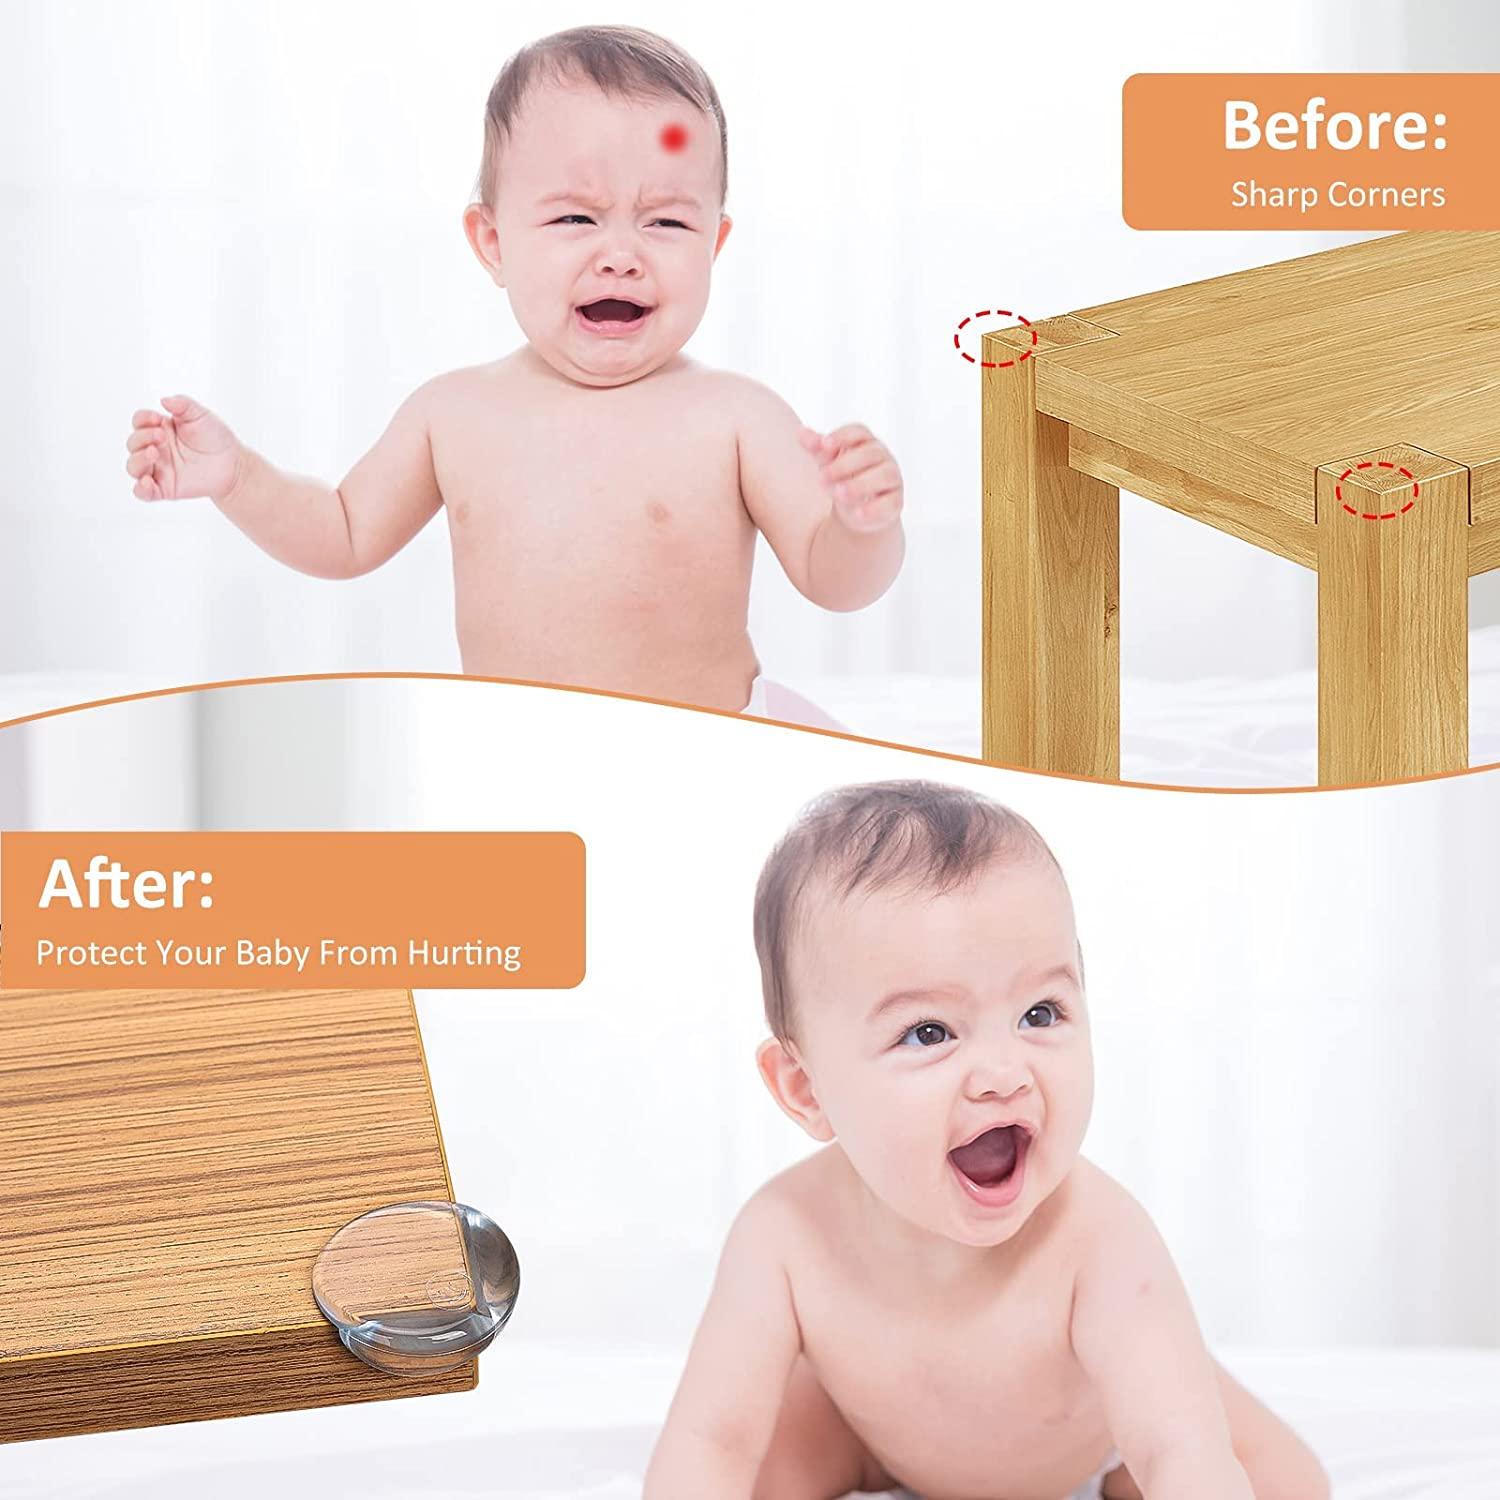 20 Pcs Corner Protector for Baby, Furniture Corner Guard for Kids  Safety,Child Safety Corner Cushion with Acrylic Adhesive, Clear Edge  Bumpers for